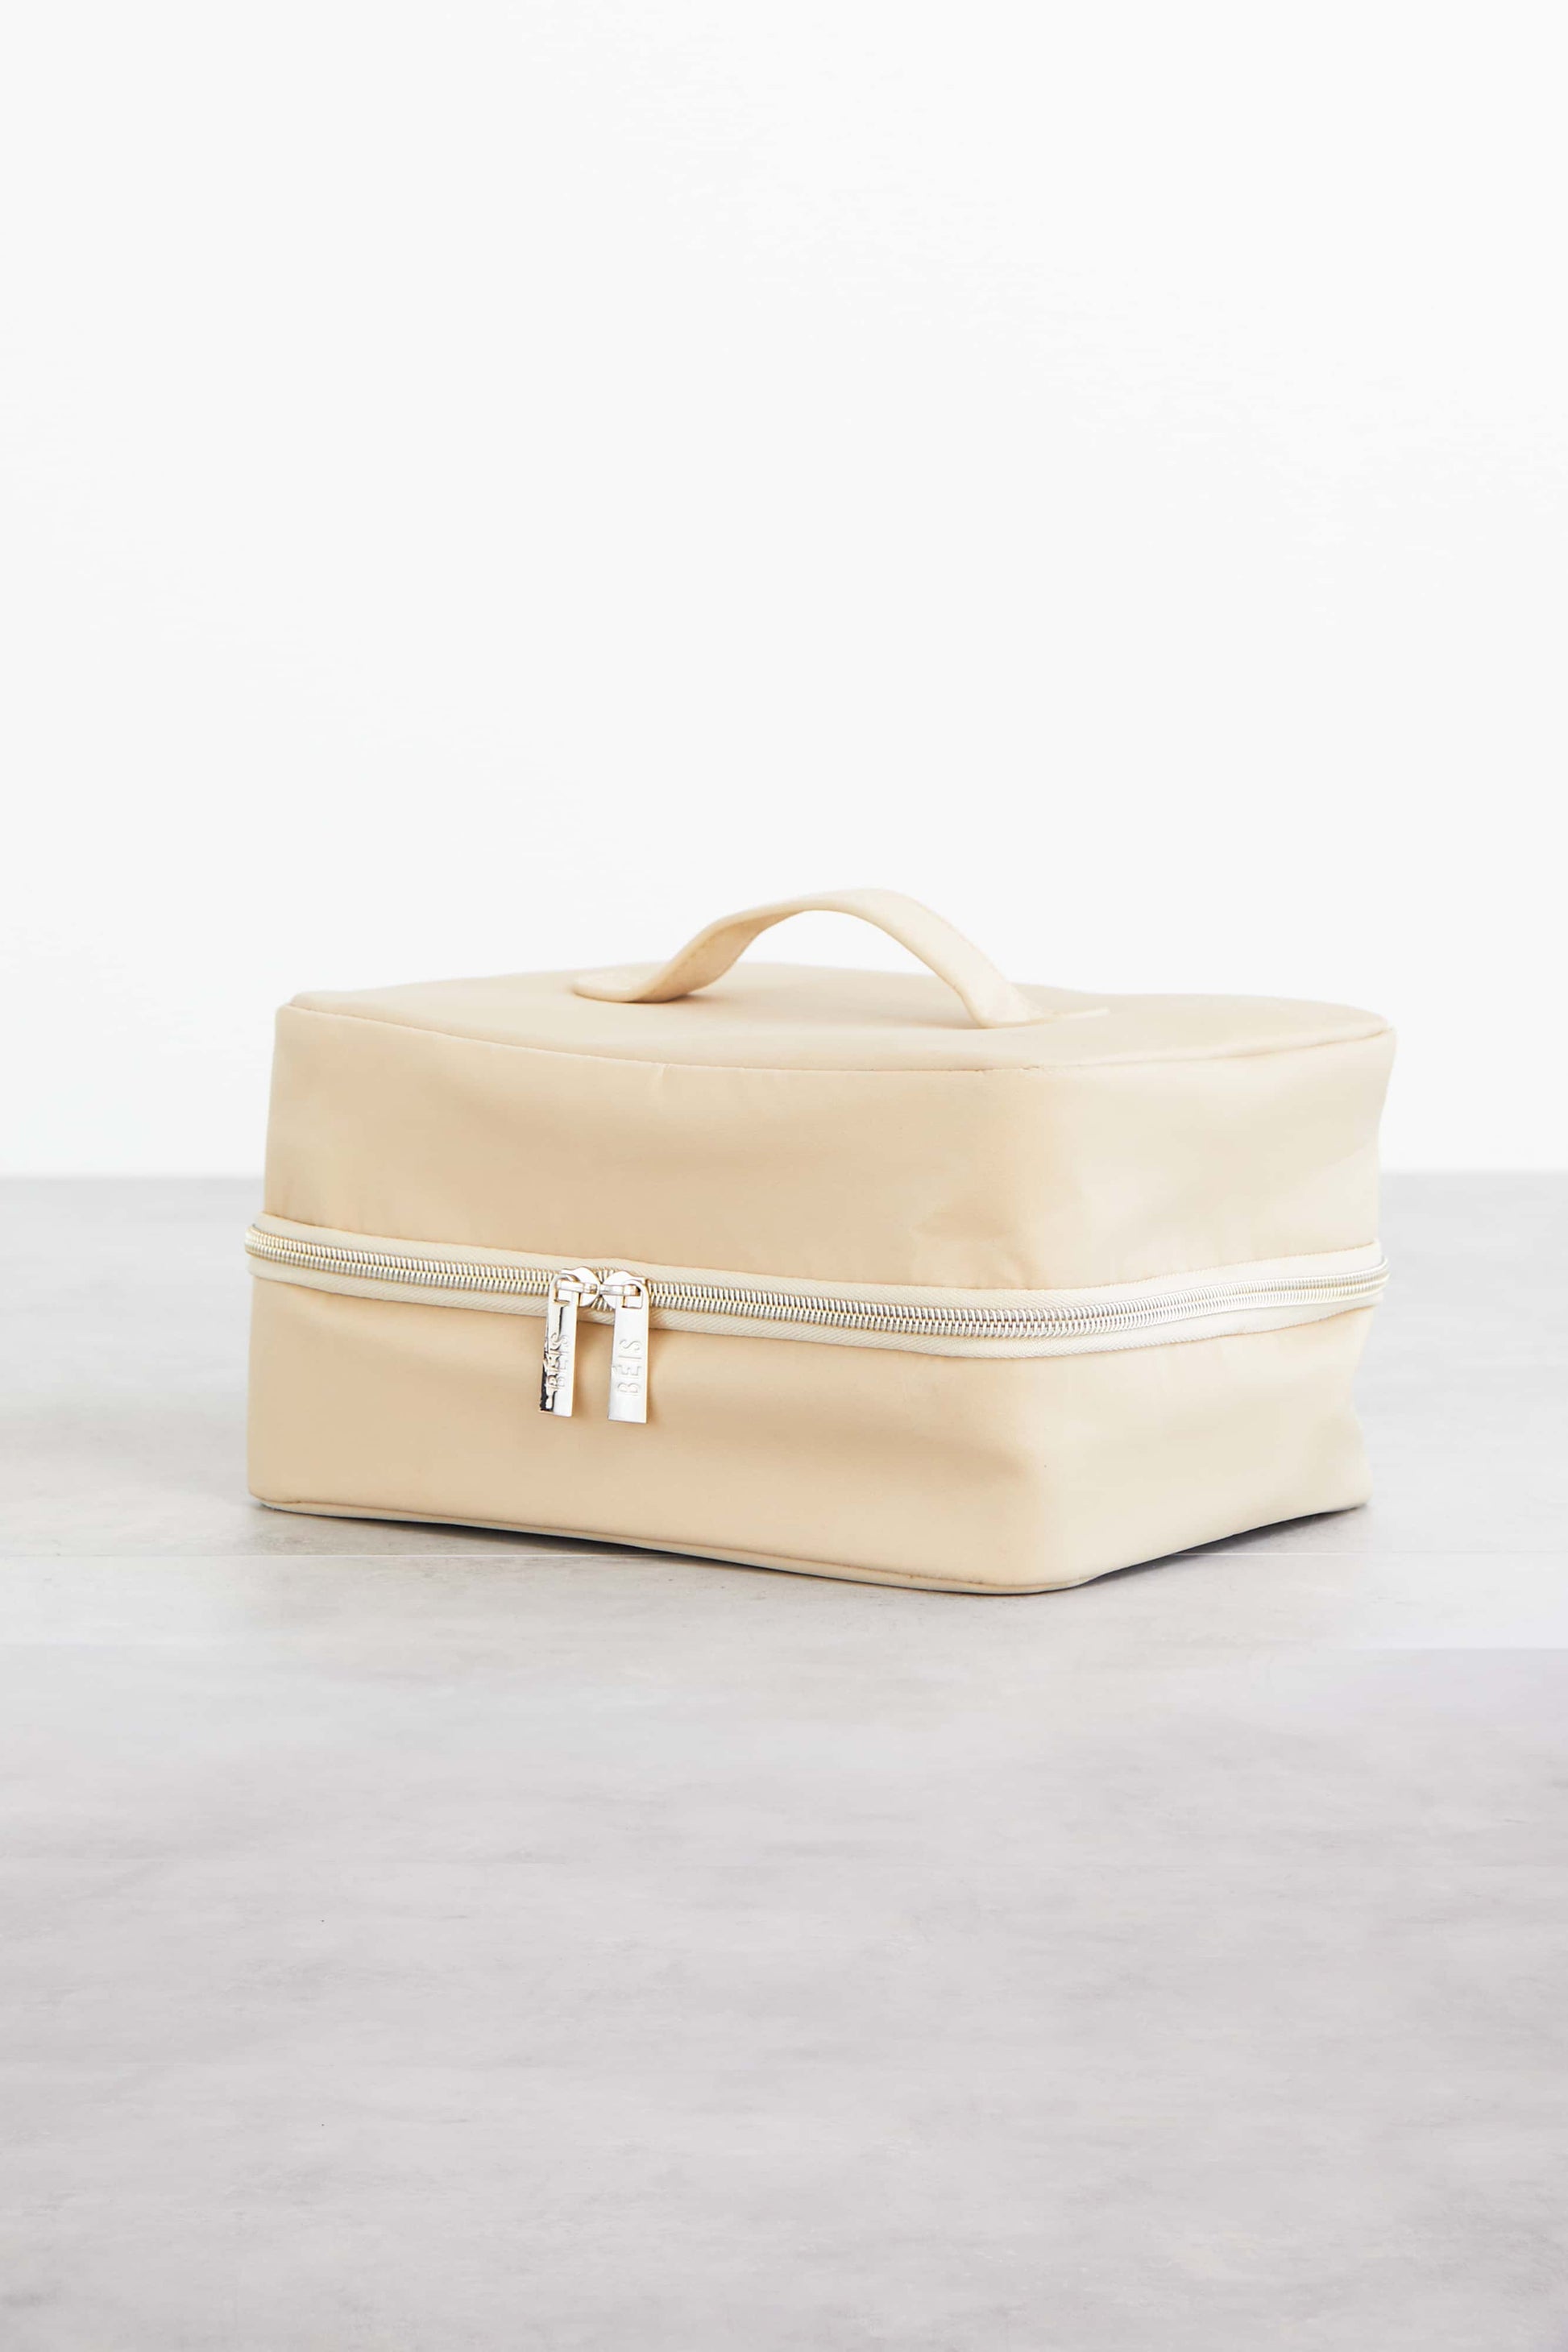 The Cosmetic Case in Beige